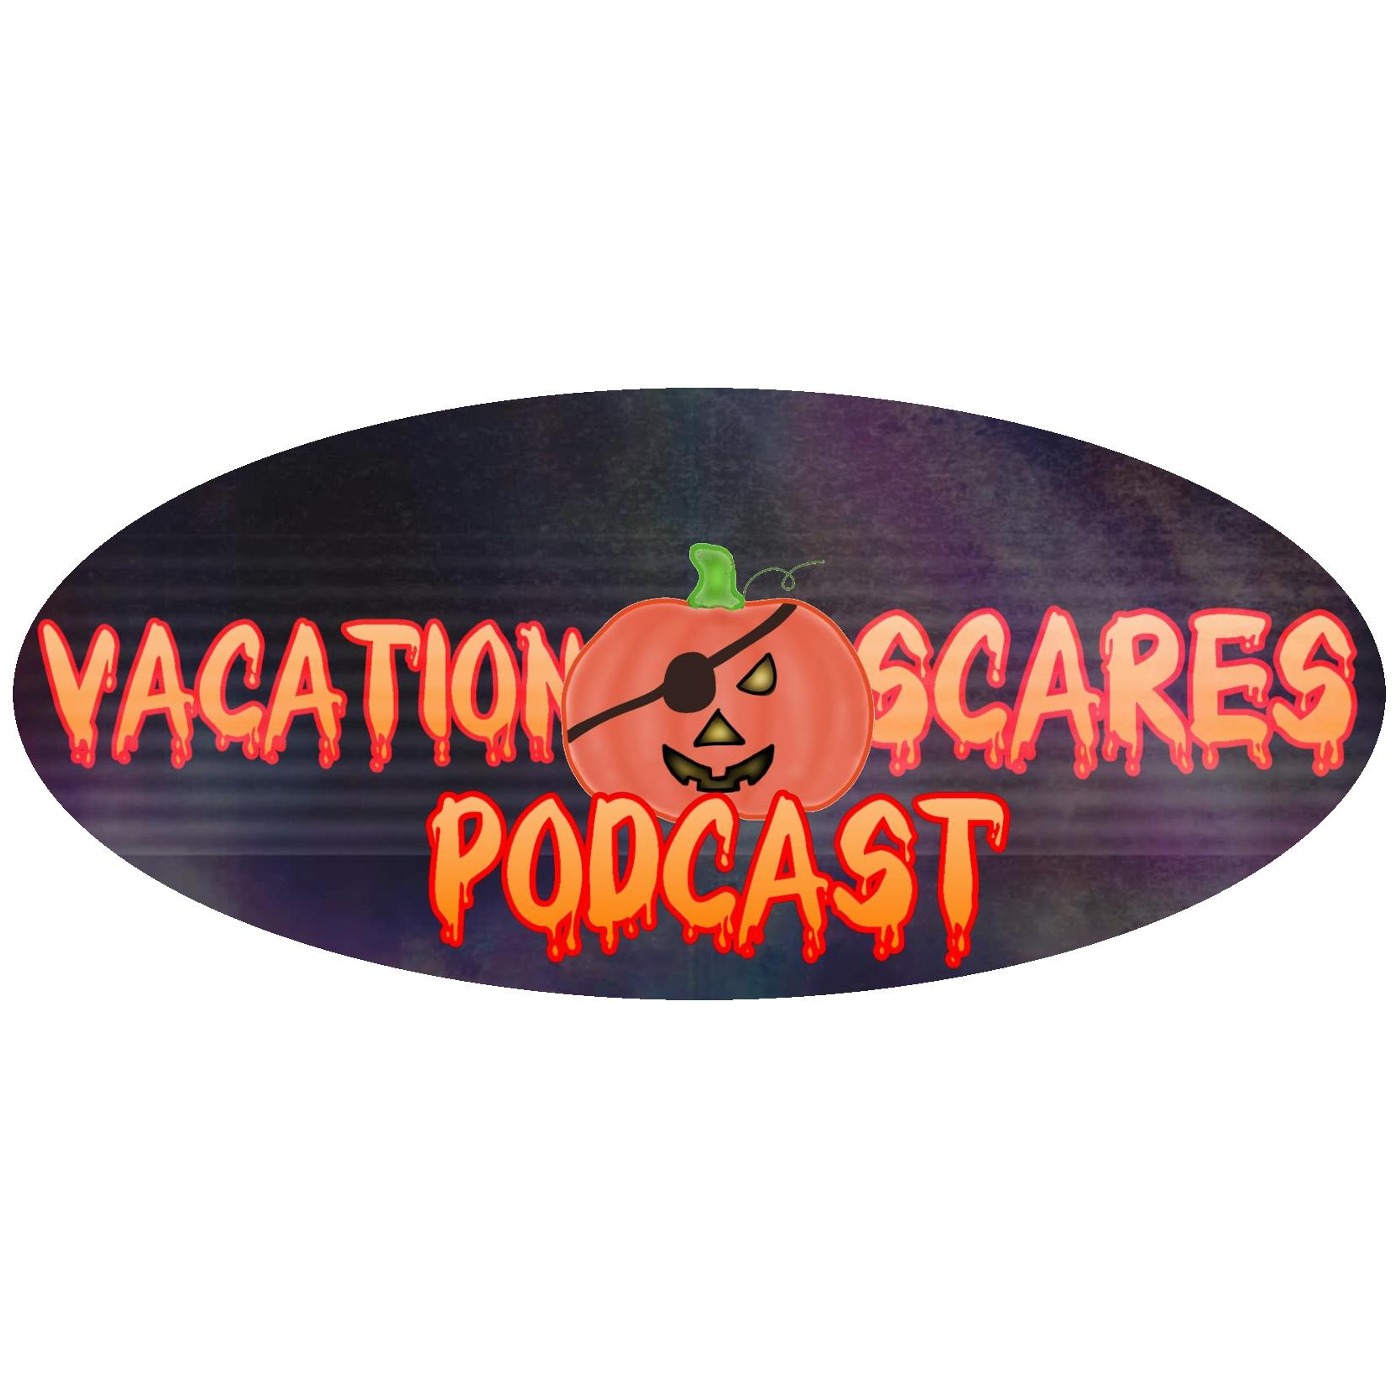 VacationScares 159: Follow-up to Kevin Murphy’s Vacation Planning & HHN Dining with Jon Self